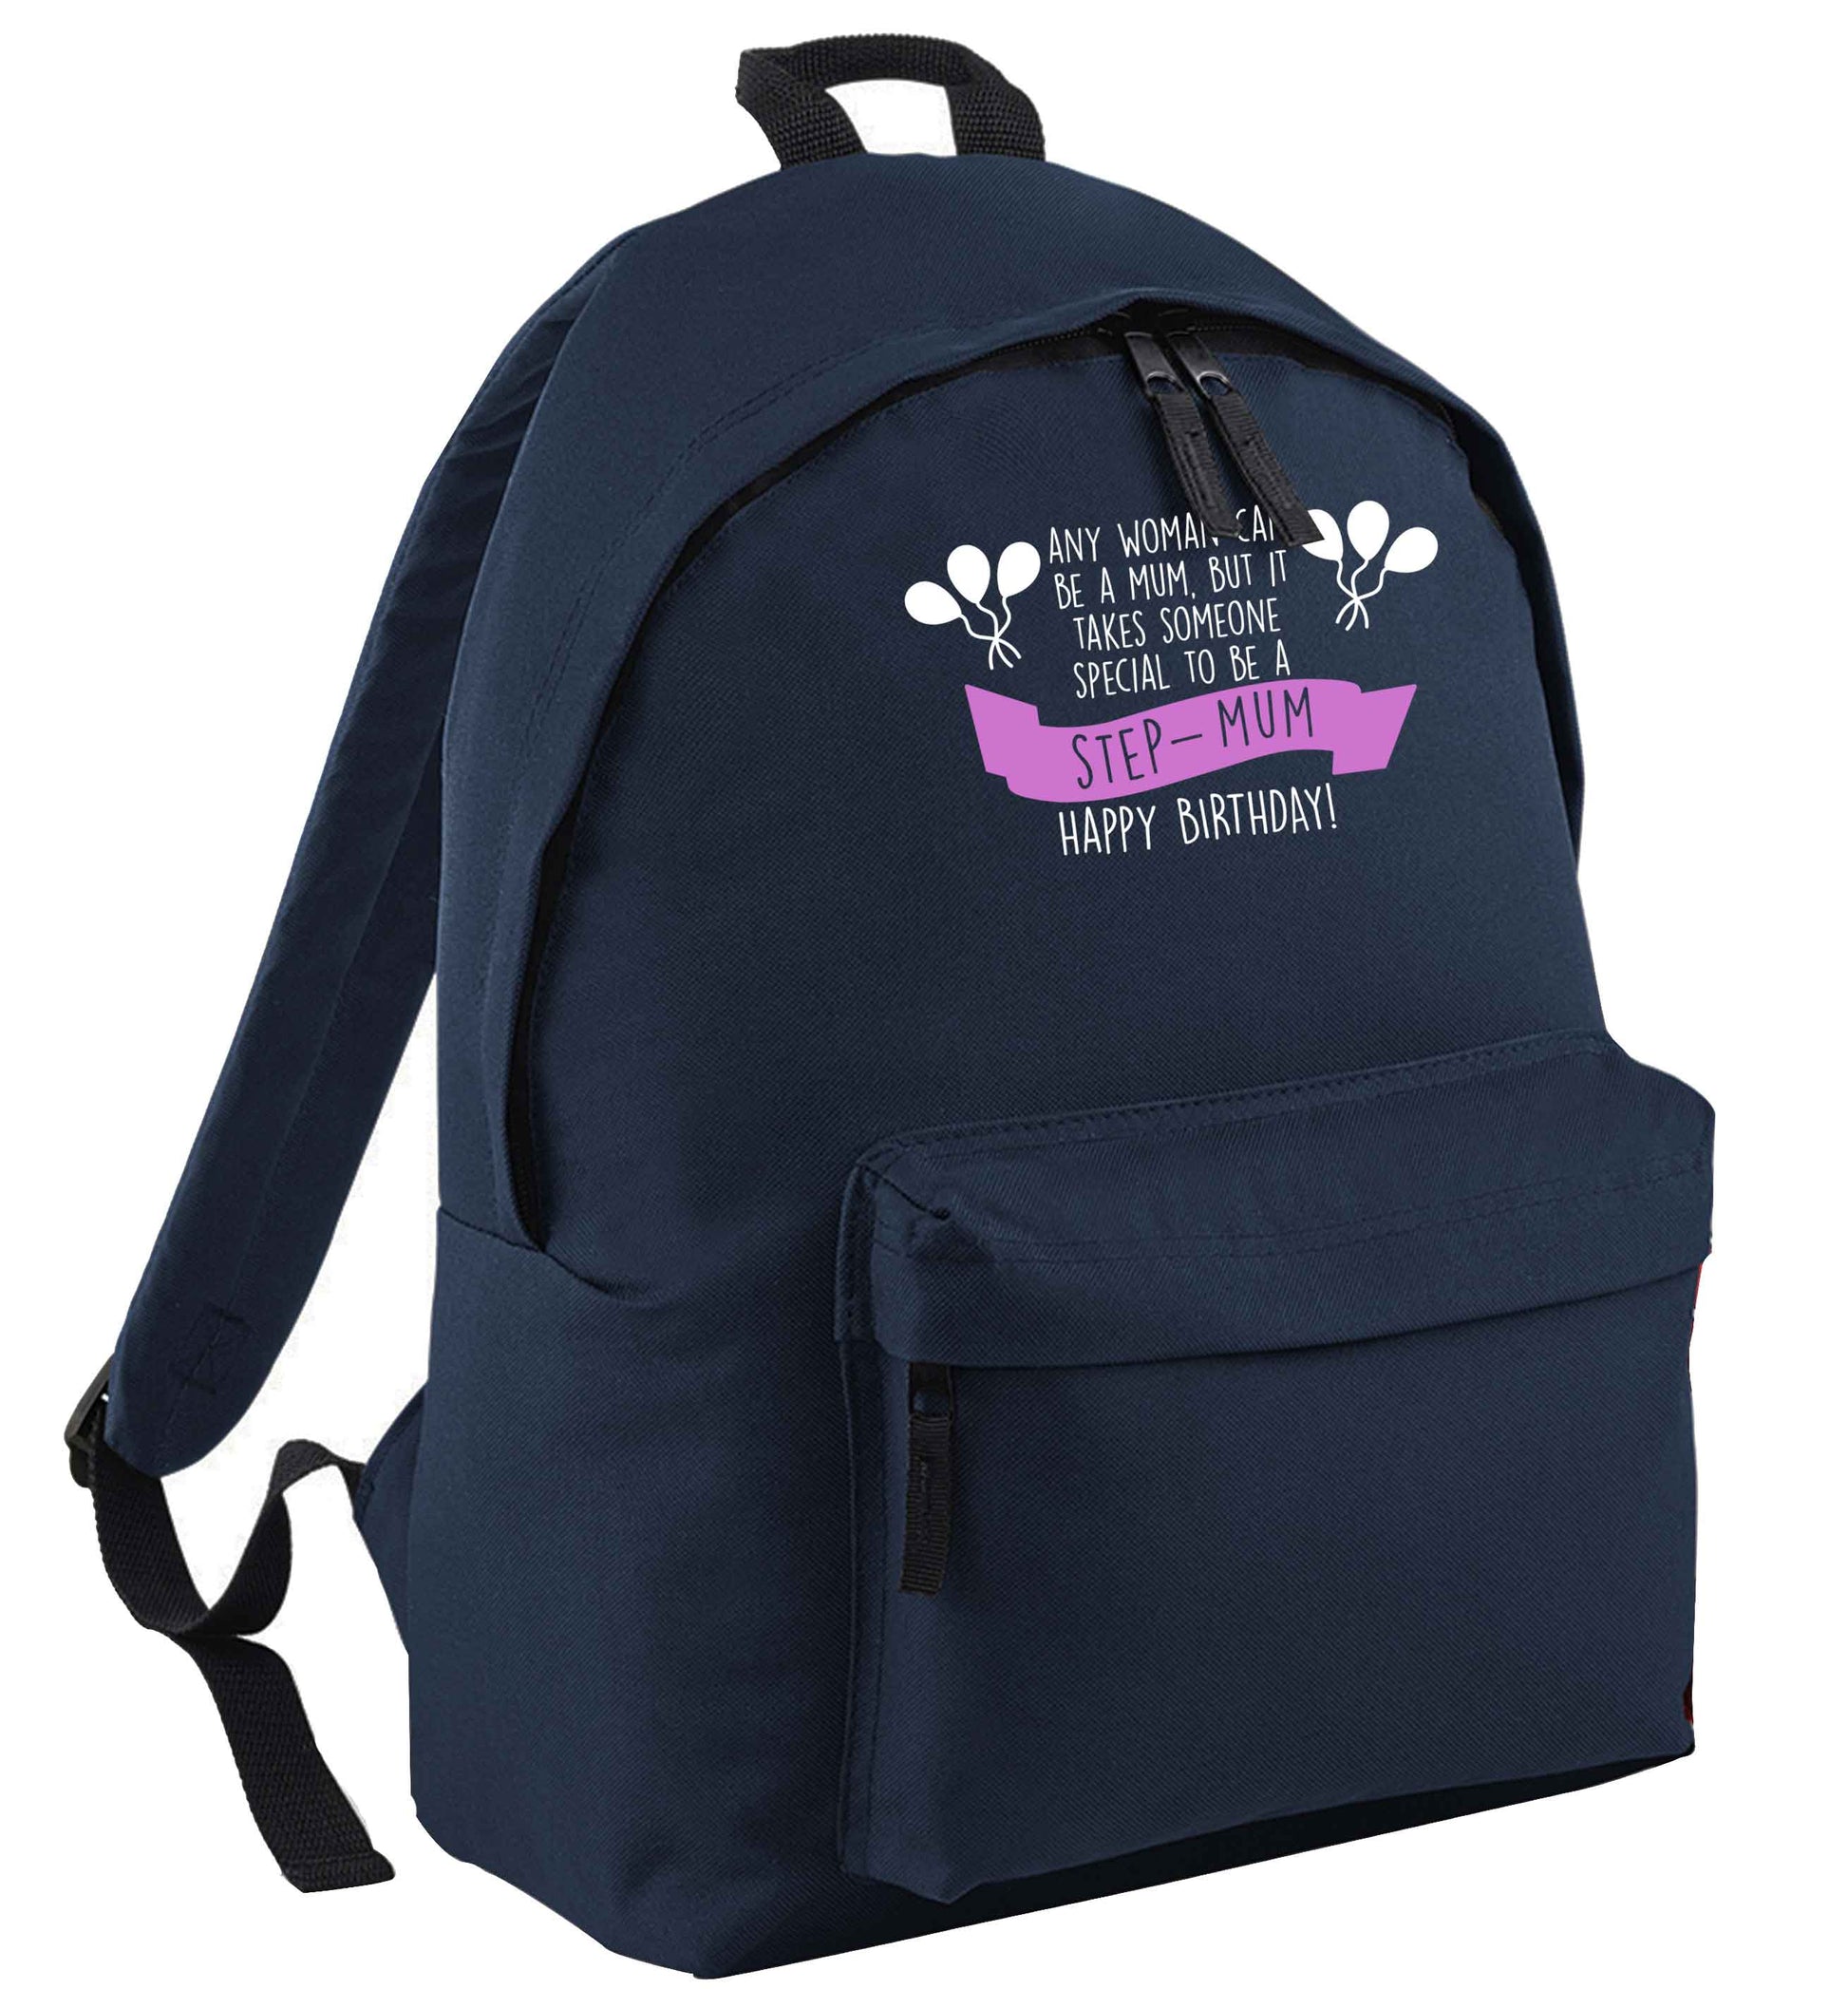 Takes someone special to be a step-mum, happy birthday! navy adults backpack